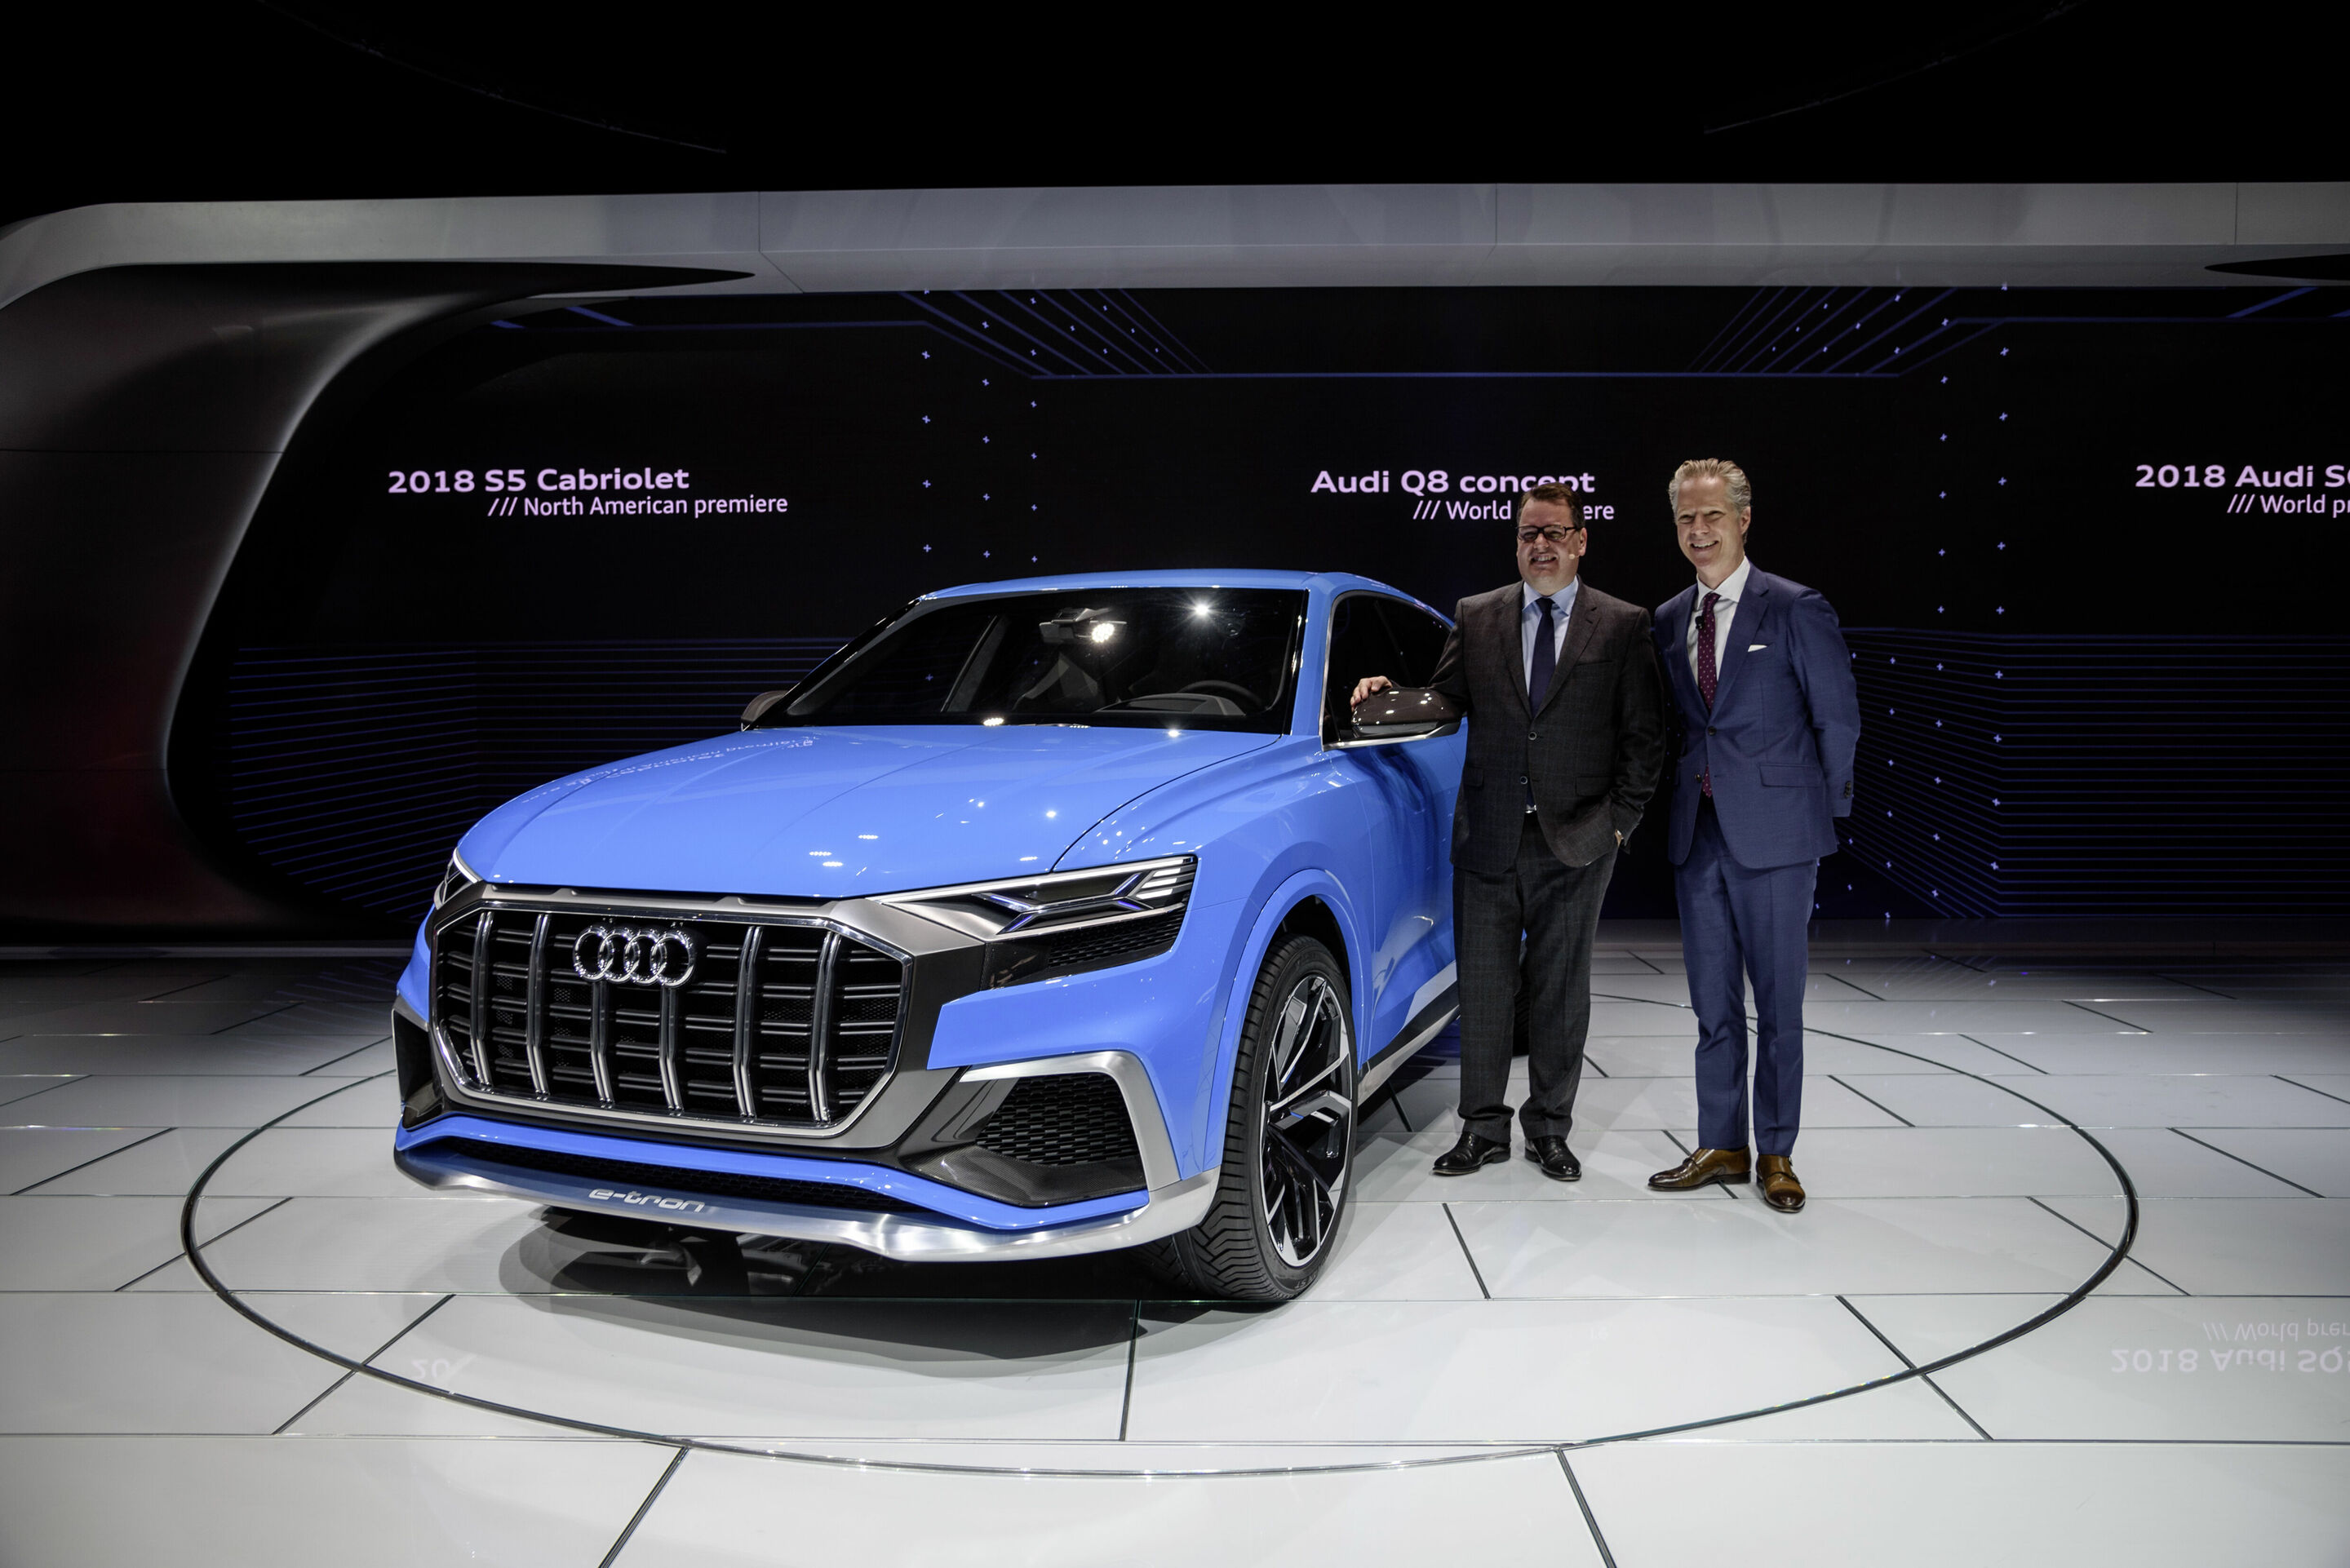 Audi at the 2017 American Auto Show in Detroit